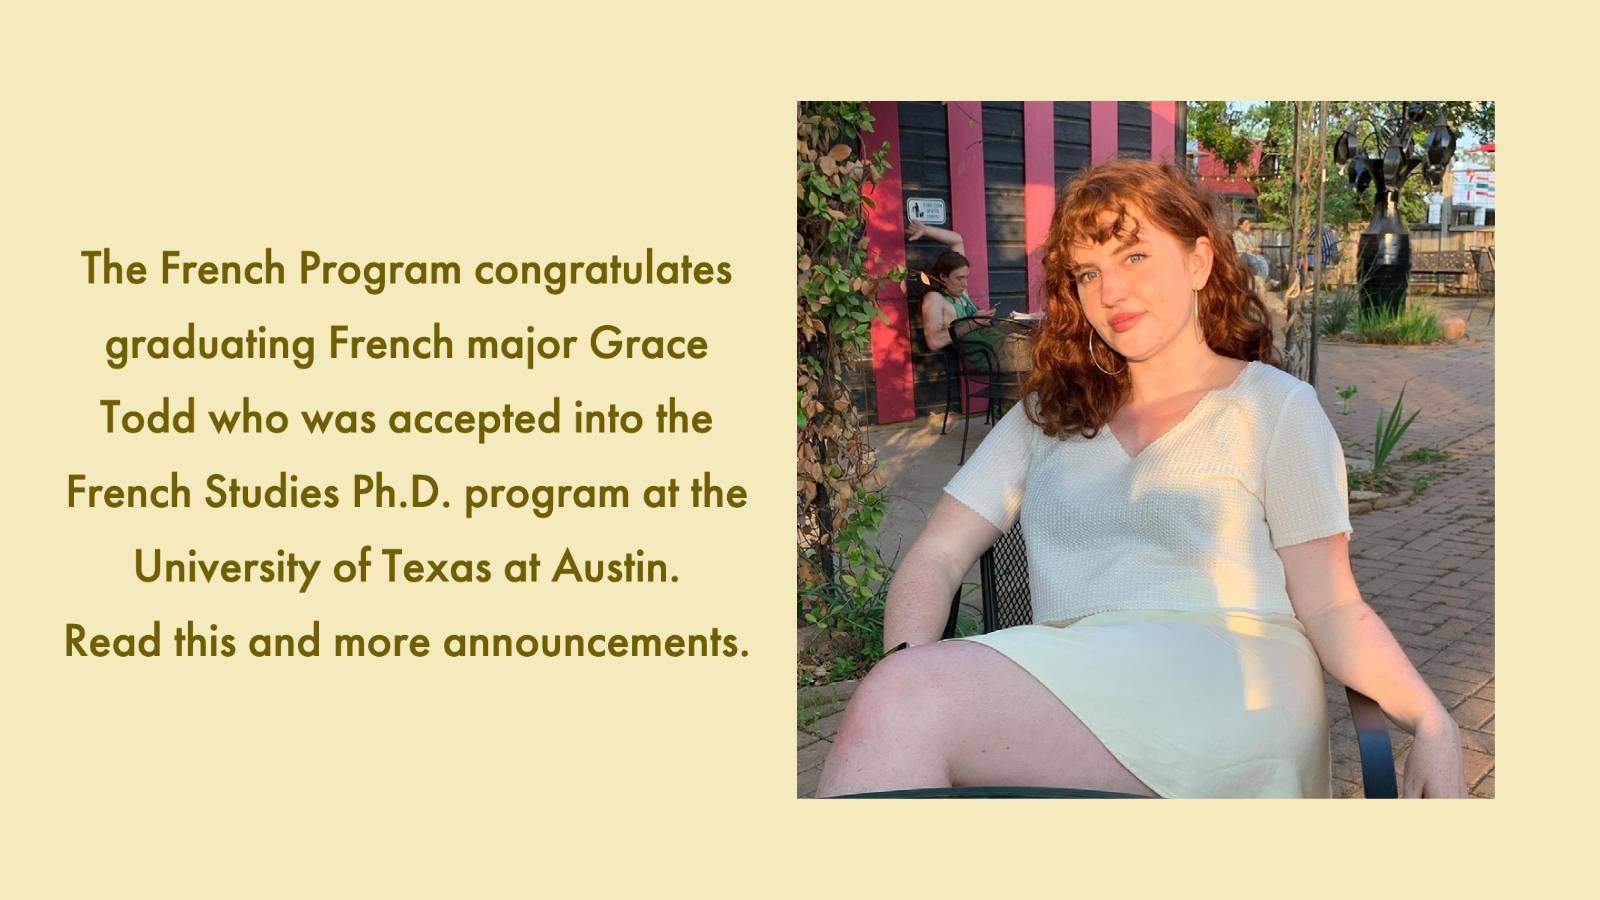 image: woman sitting on chair at outdoor café. text: The French Program congratulates graduating French major Grace Todd who was accepted into the French Studies Ph.D. program at the University of Texas at Austin.